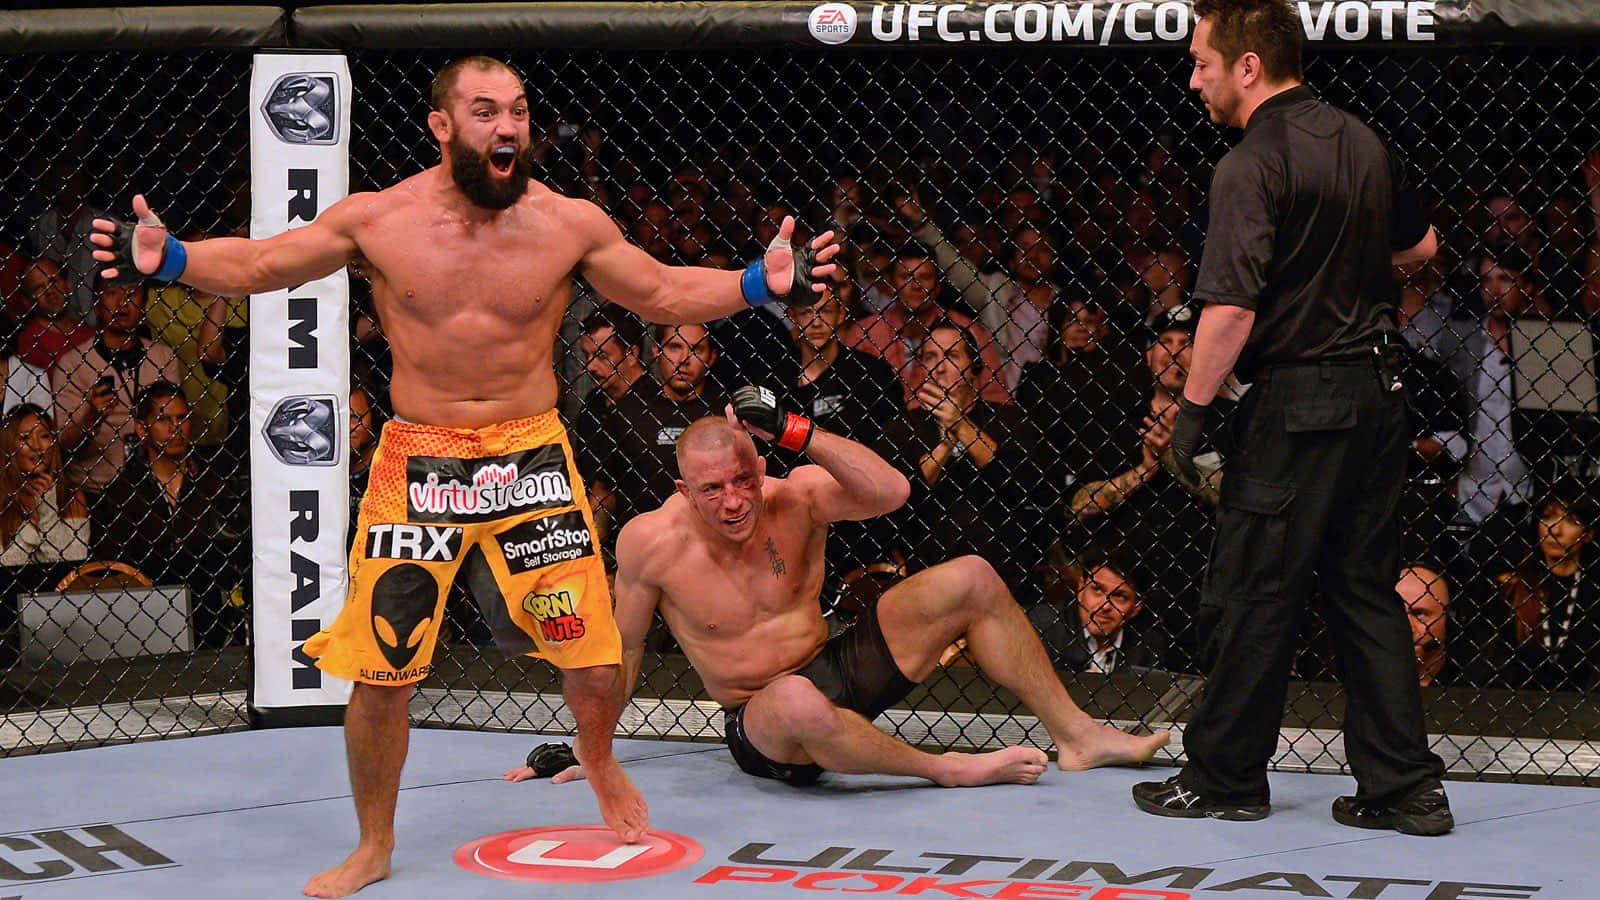 Johnyhendricks Knock Down (in English) Can Be Translated To 